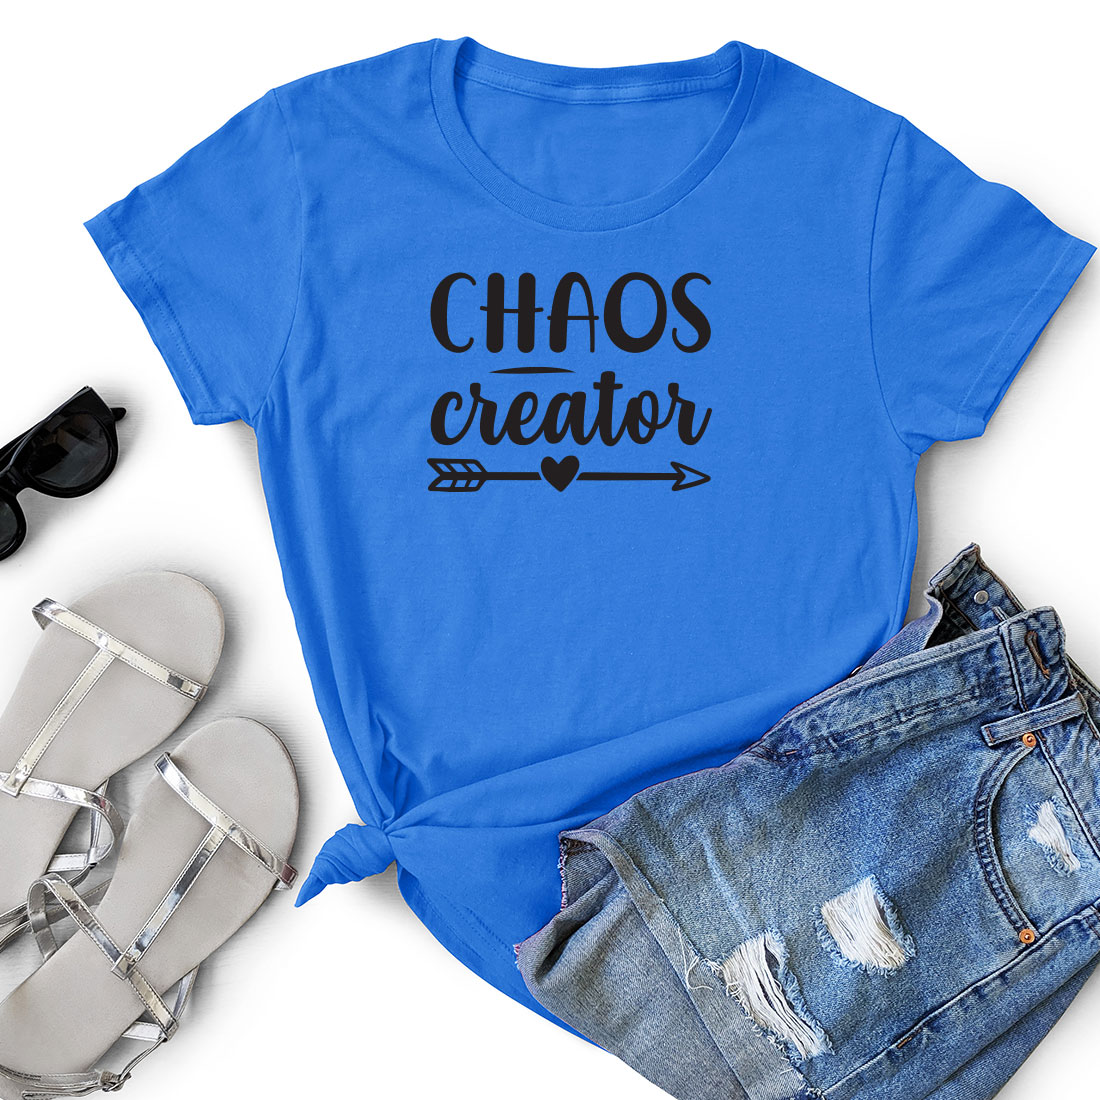 T - shirt that says chaos creator next to a pair of shorts.